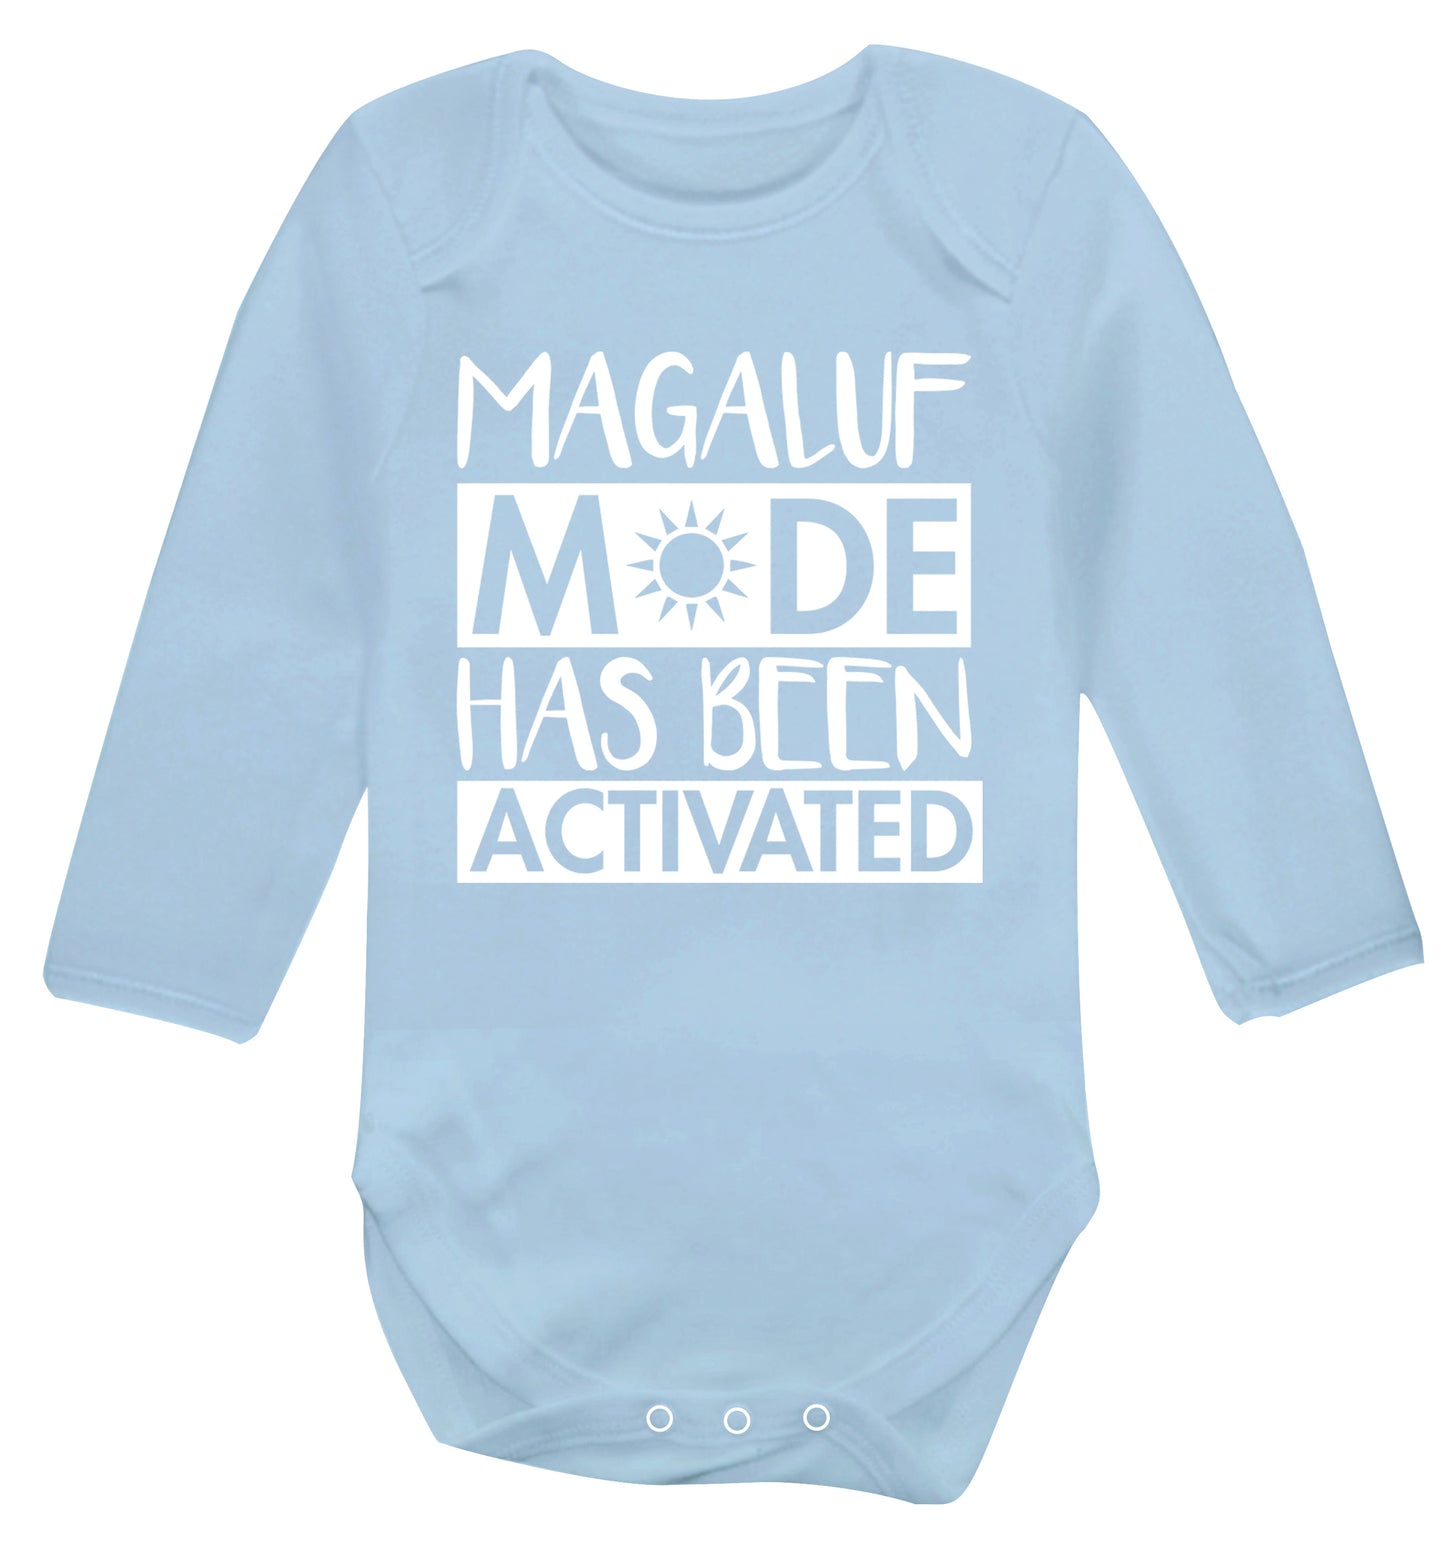 Magaluf mode has been activated Baby Vest long sleeved pale blue 6-12 months